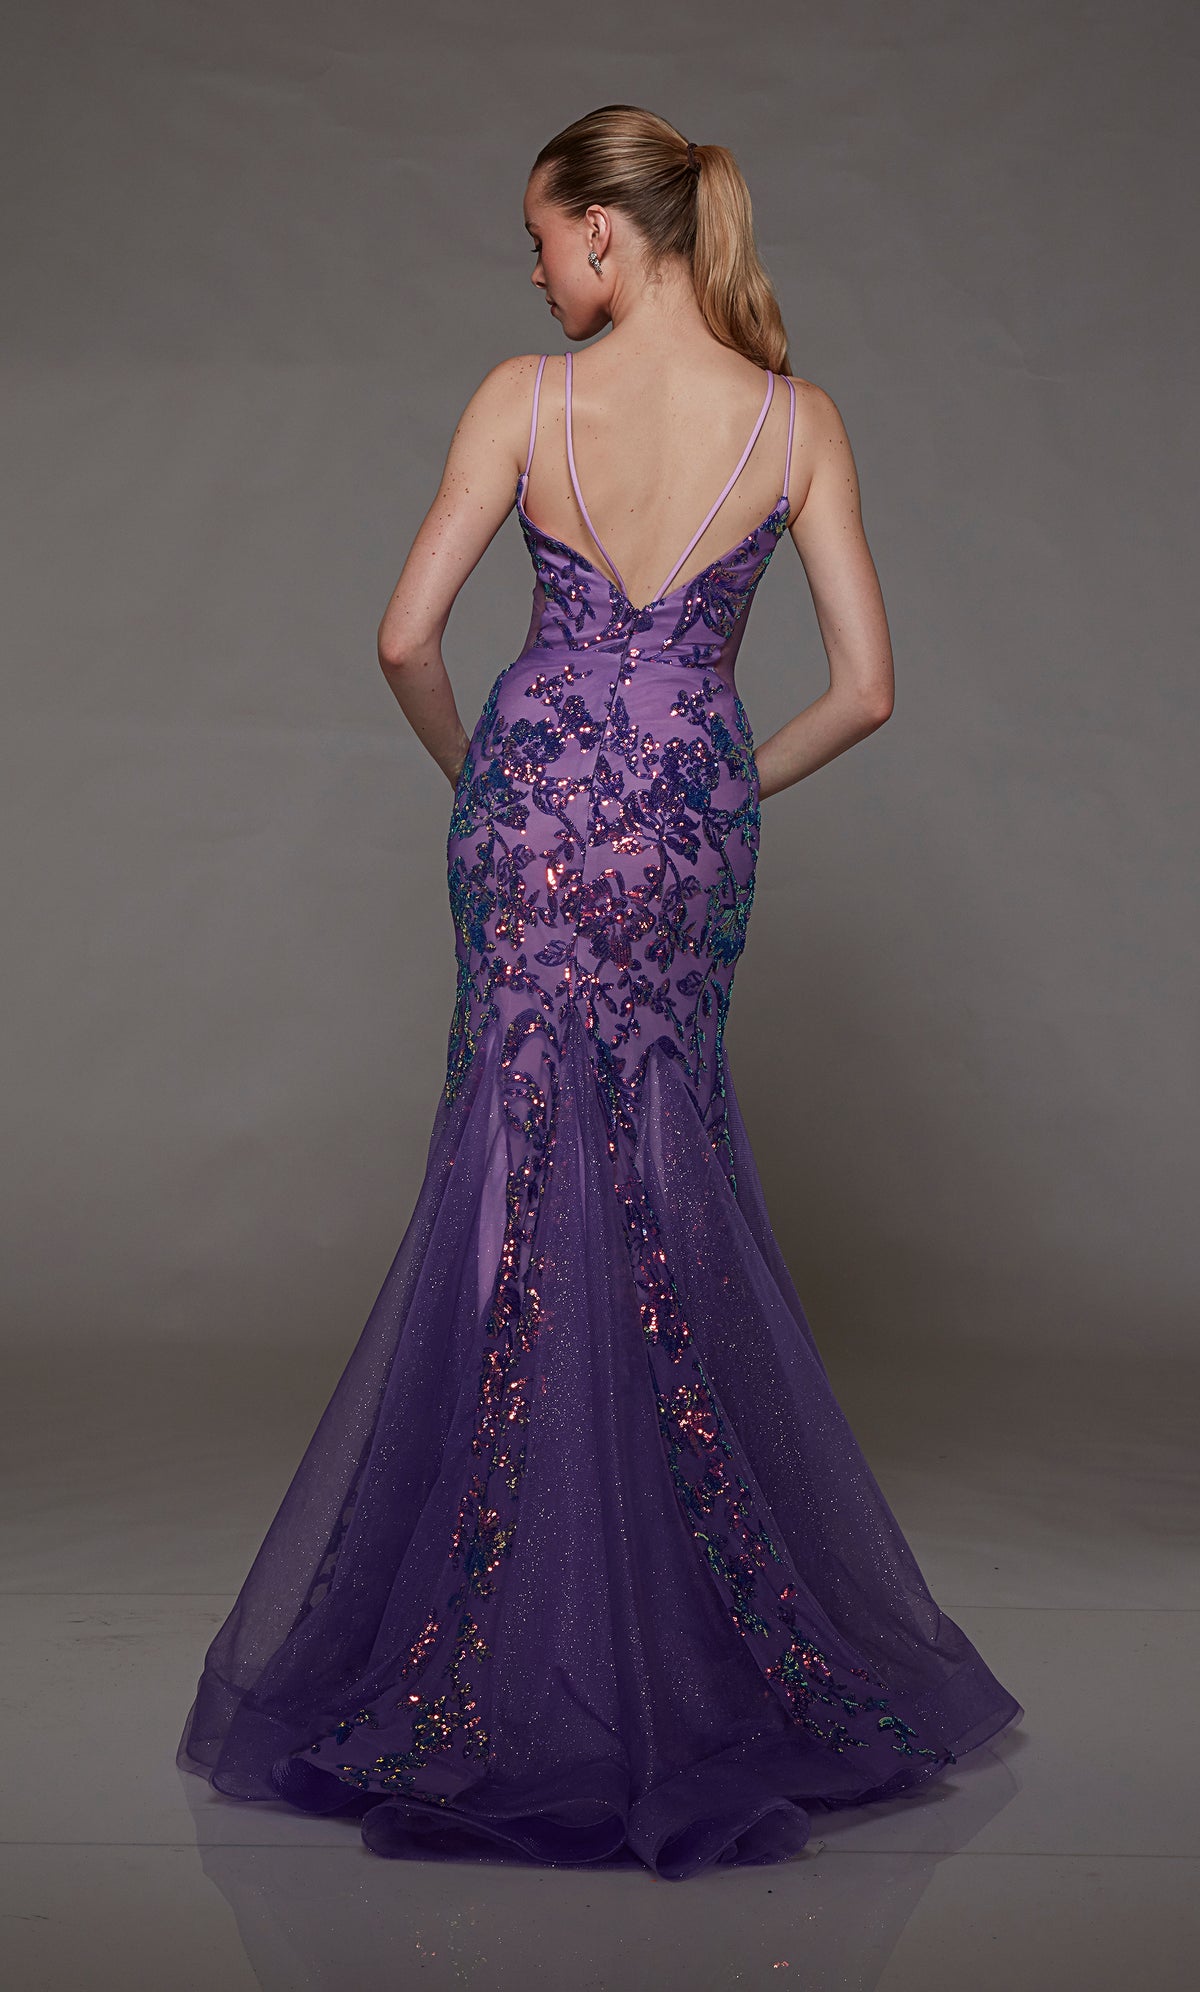 Purple-pink mermaid dress: Plunging neckline, sequin flowers, sheer side cutouts, and dual straps for an stunning and sophisticated look.